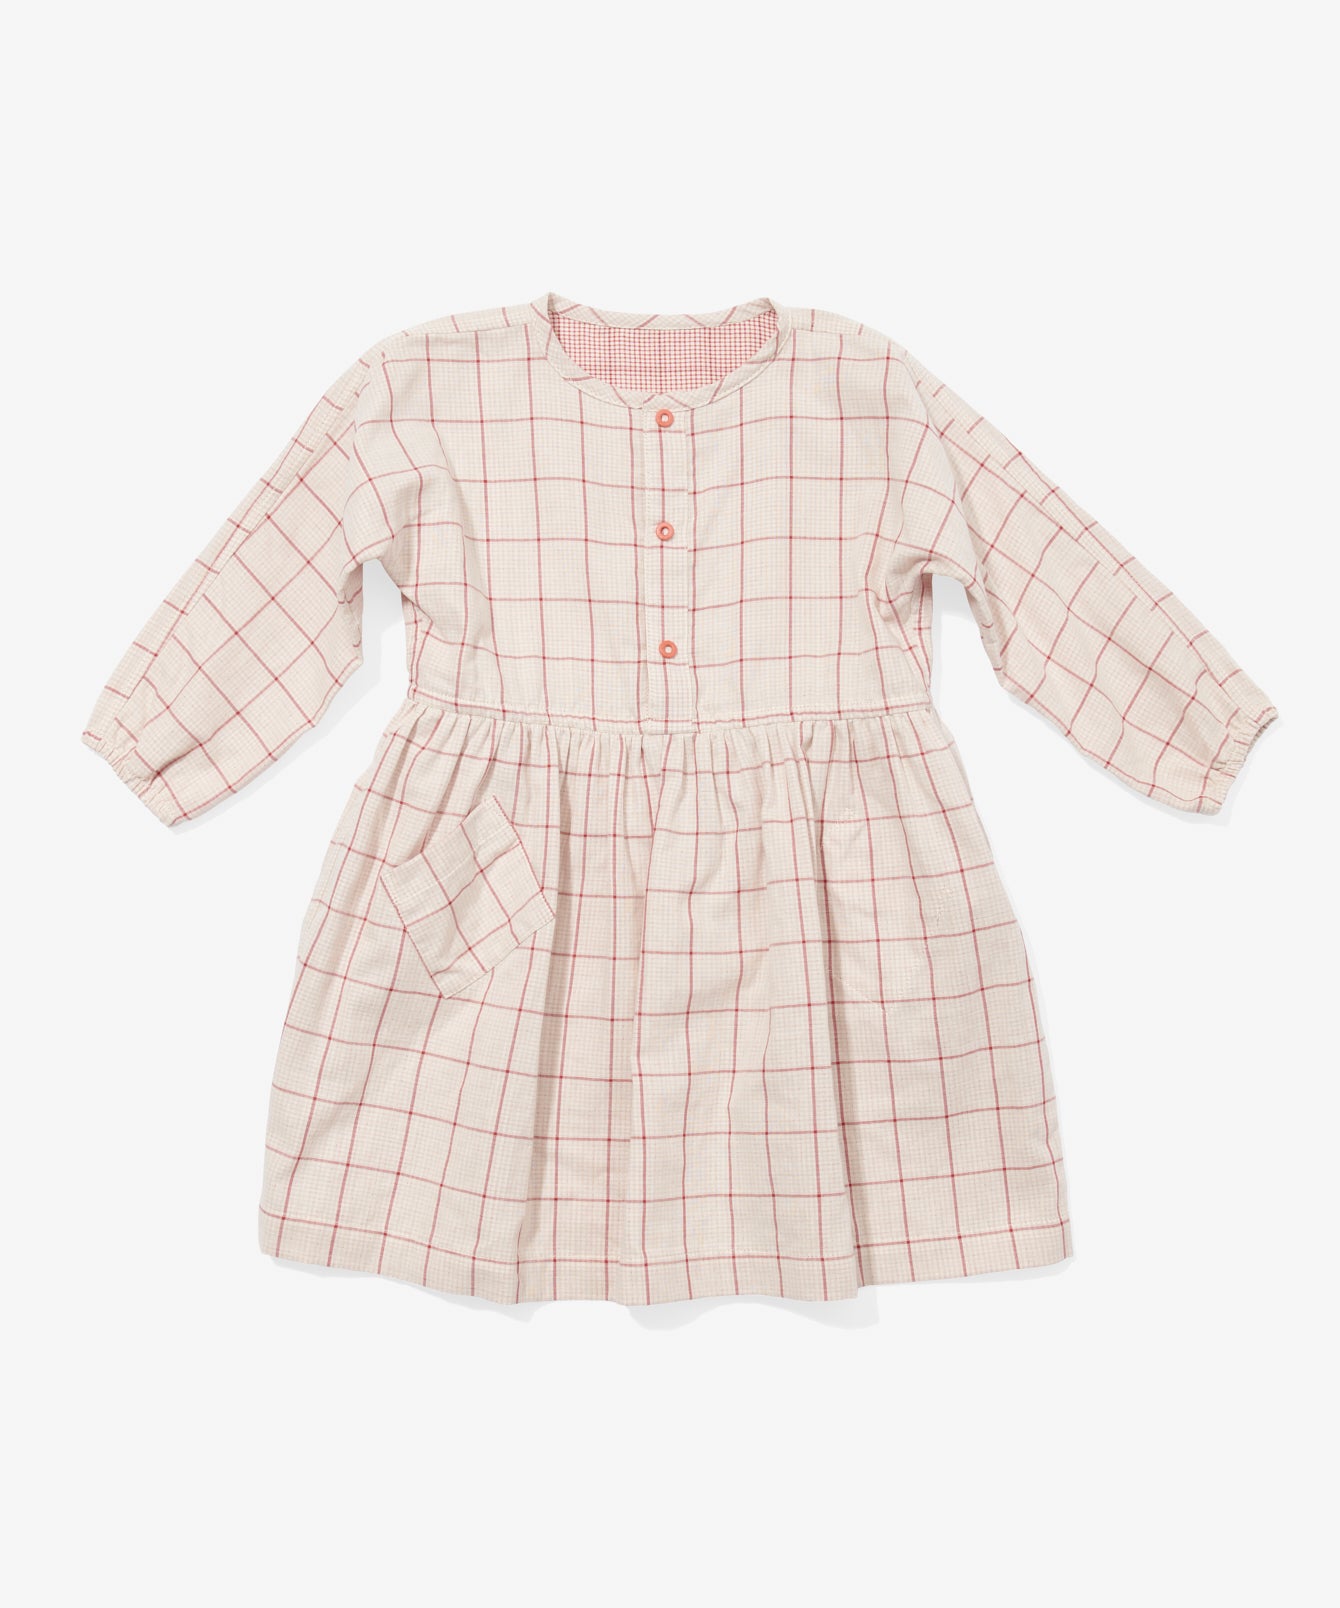 Me Me Girls Oso – Oso Dress Reversible and & | Little